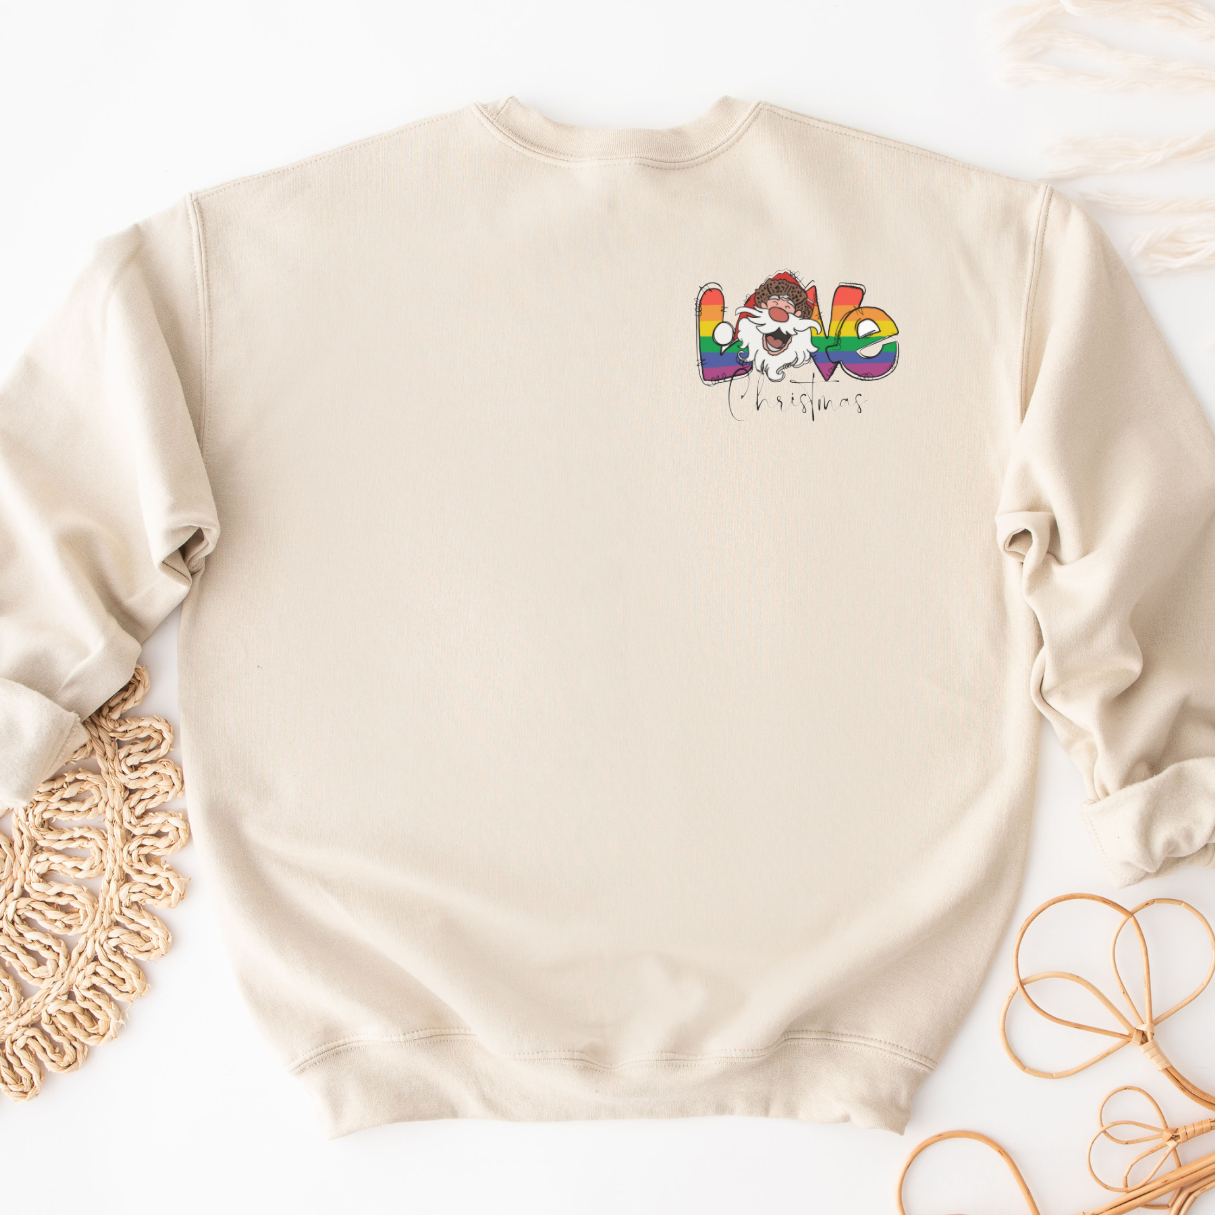 "Pride love Christmas text design centered on natural sweater."